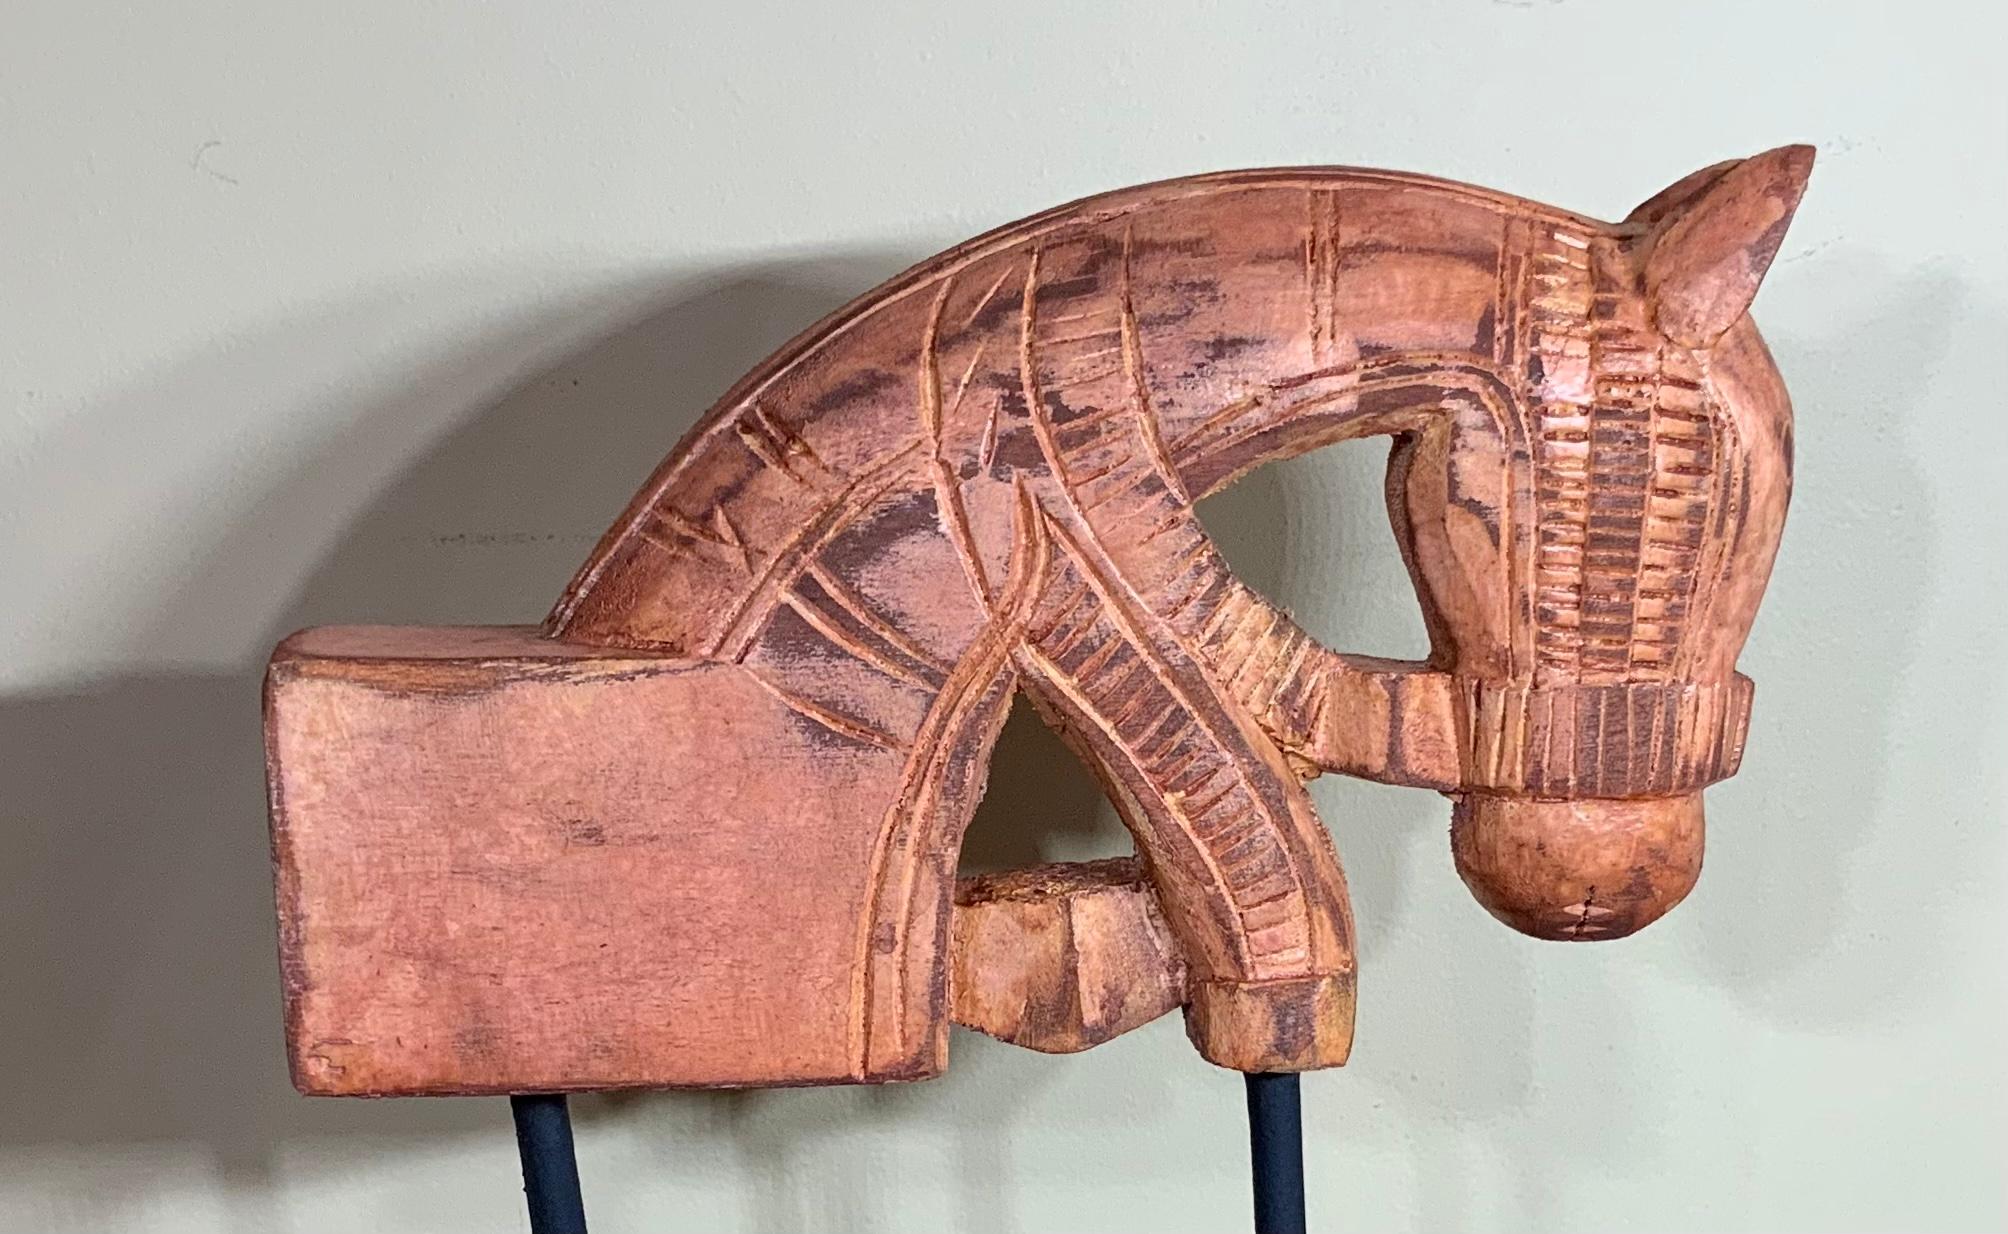 Architectural Hand Carved Wood Horse In Good Condition For Sale In Delray Beach, FL